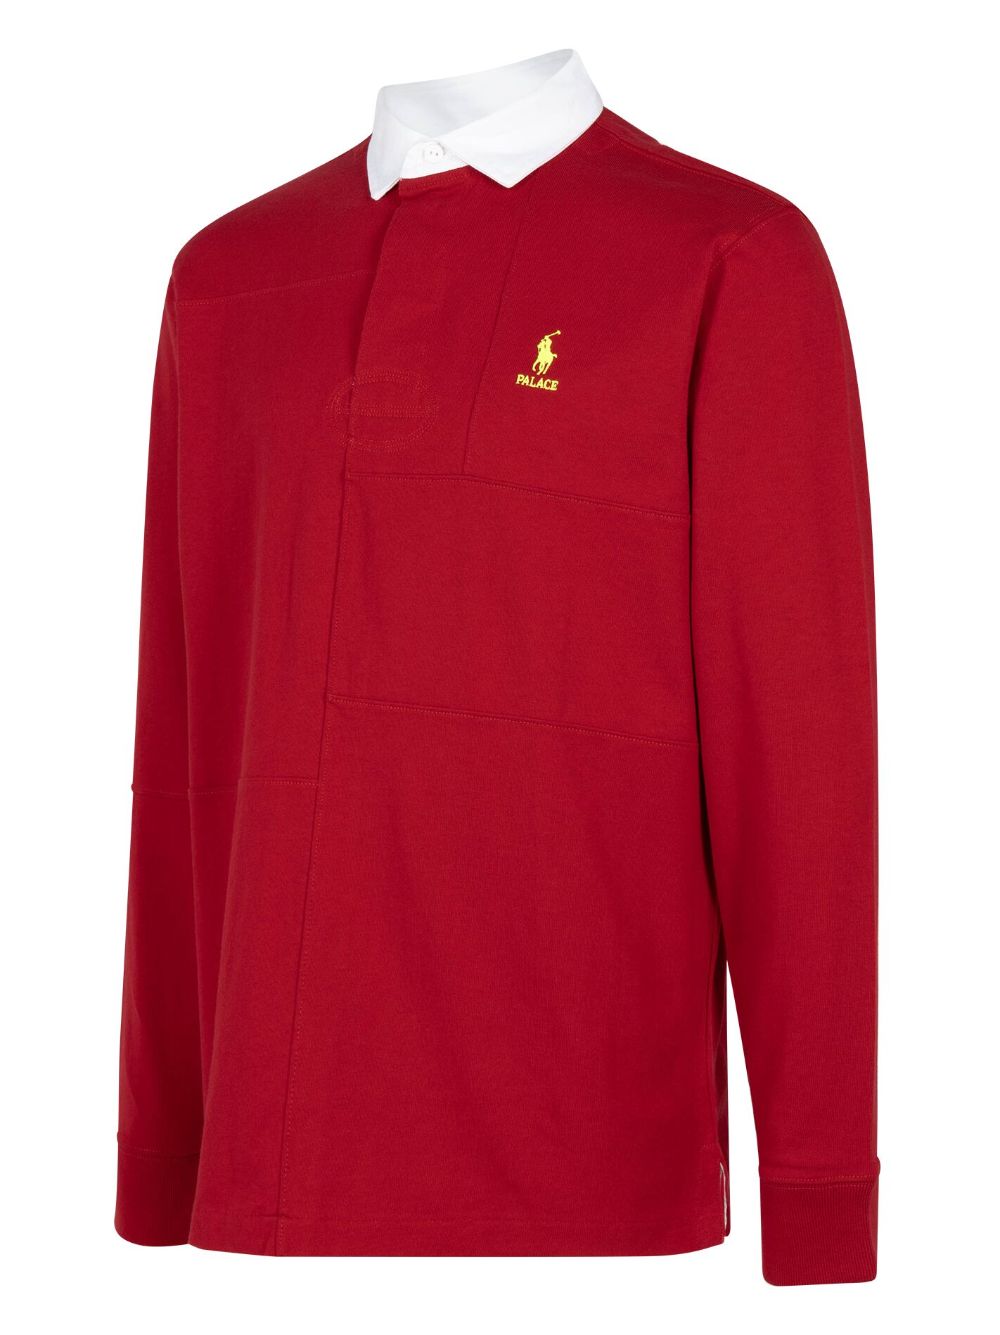 Palace x Polo Ralph Lauren rugbyshirt Rood